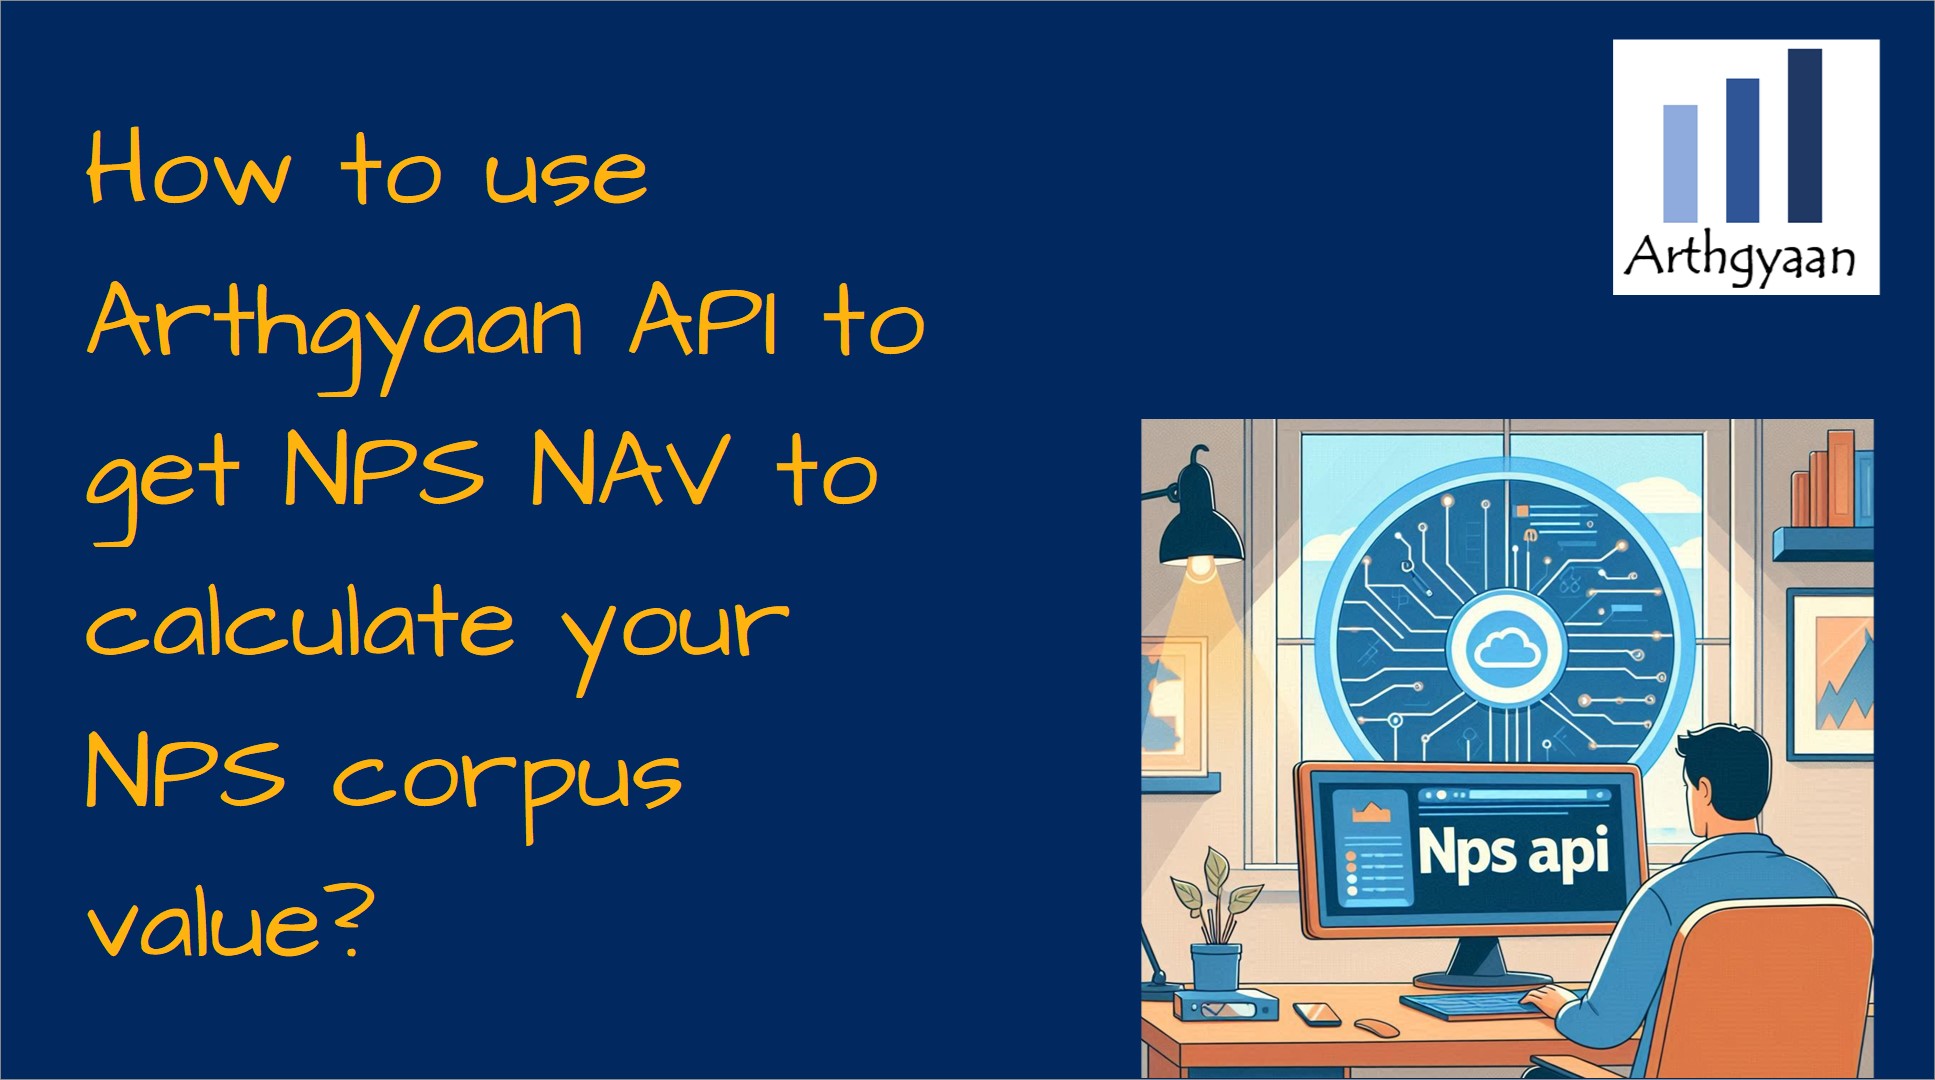 How to use Arthgyaan API to get NPS NAV to calculate your NPS corpus value?